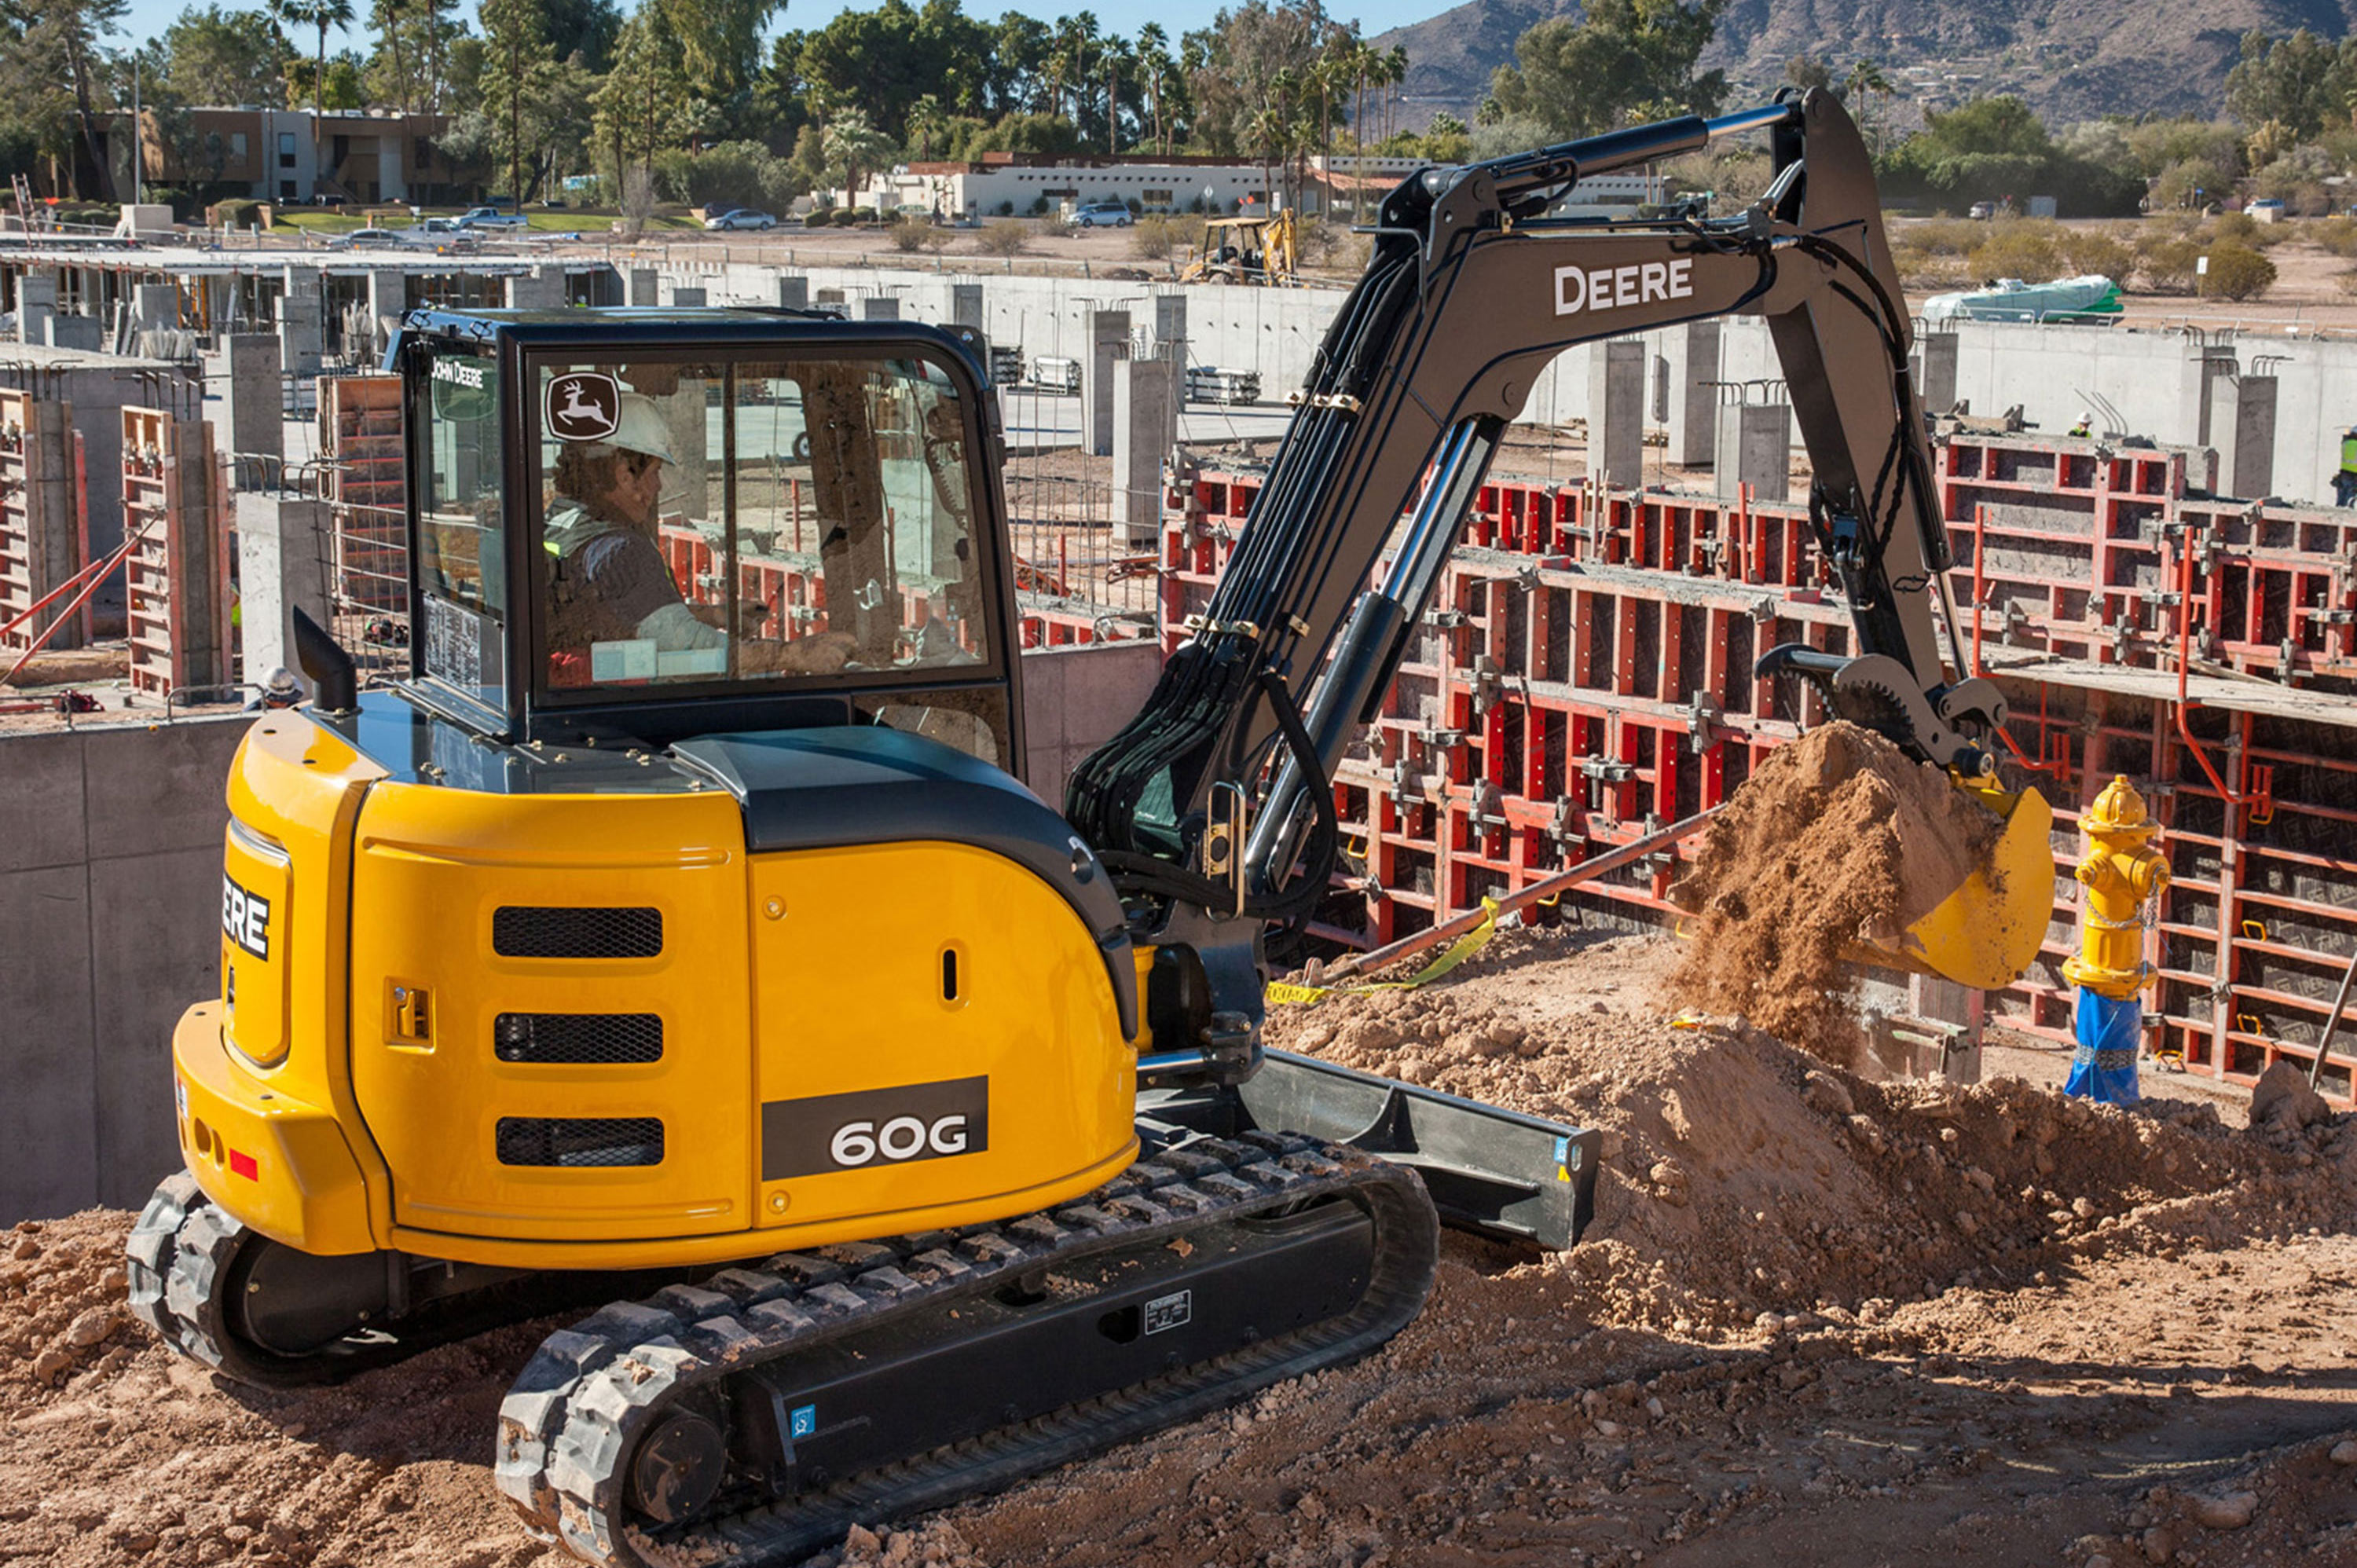 The 60G joins the G-Series, which was unveiled at World of Concrete ...